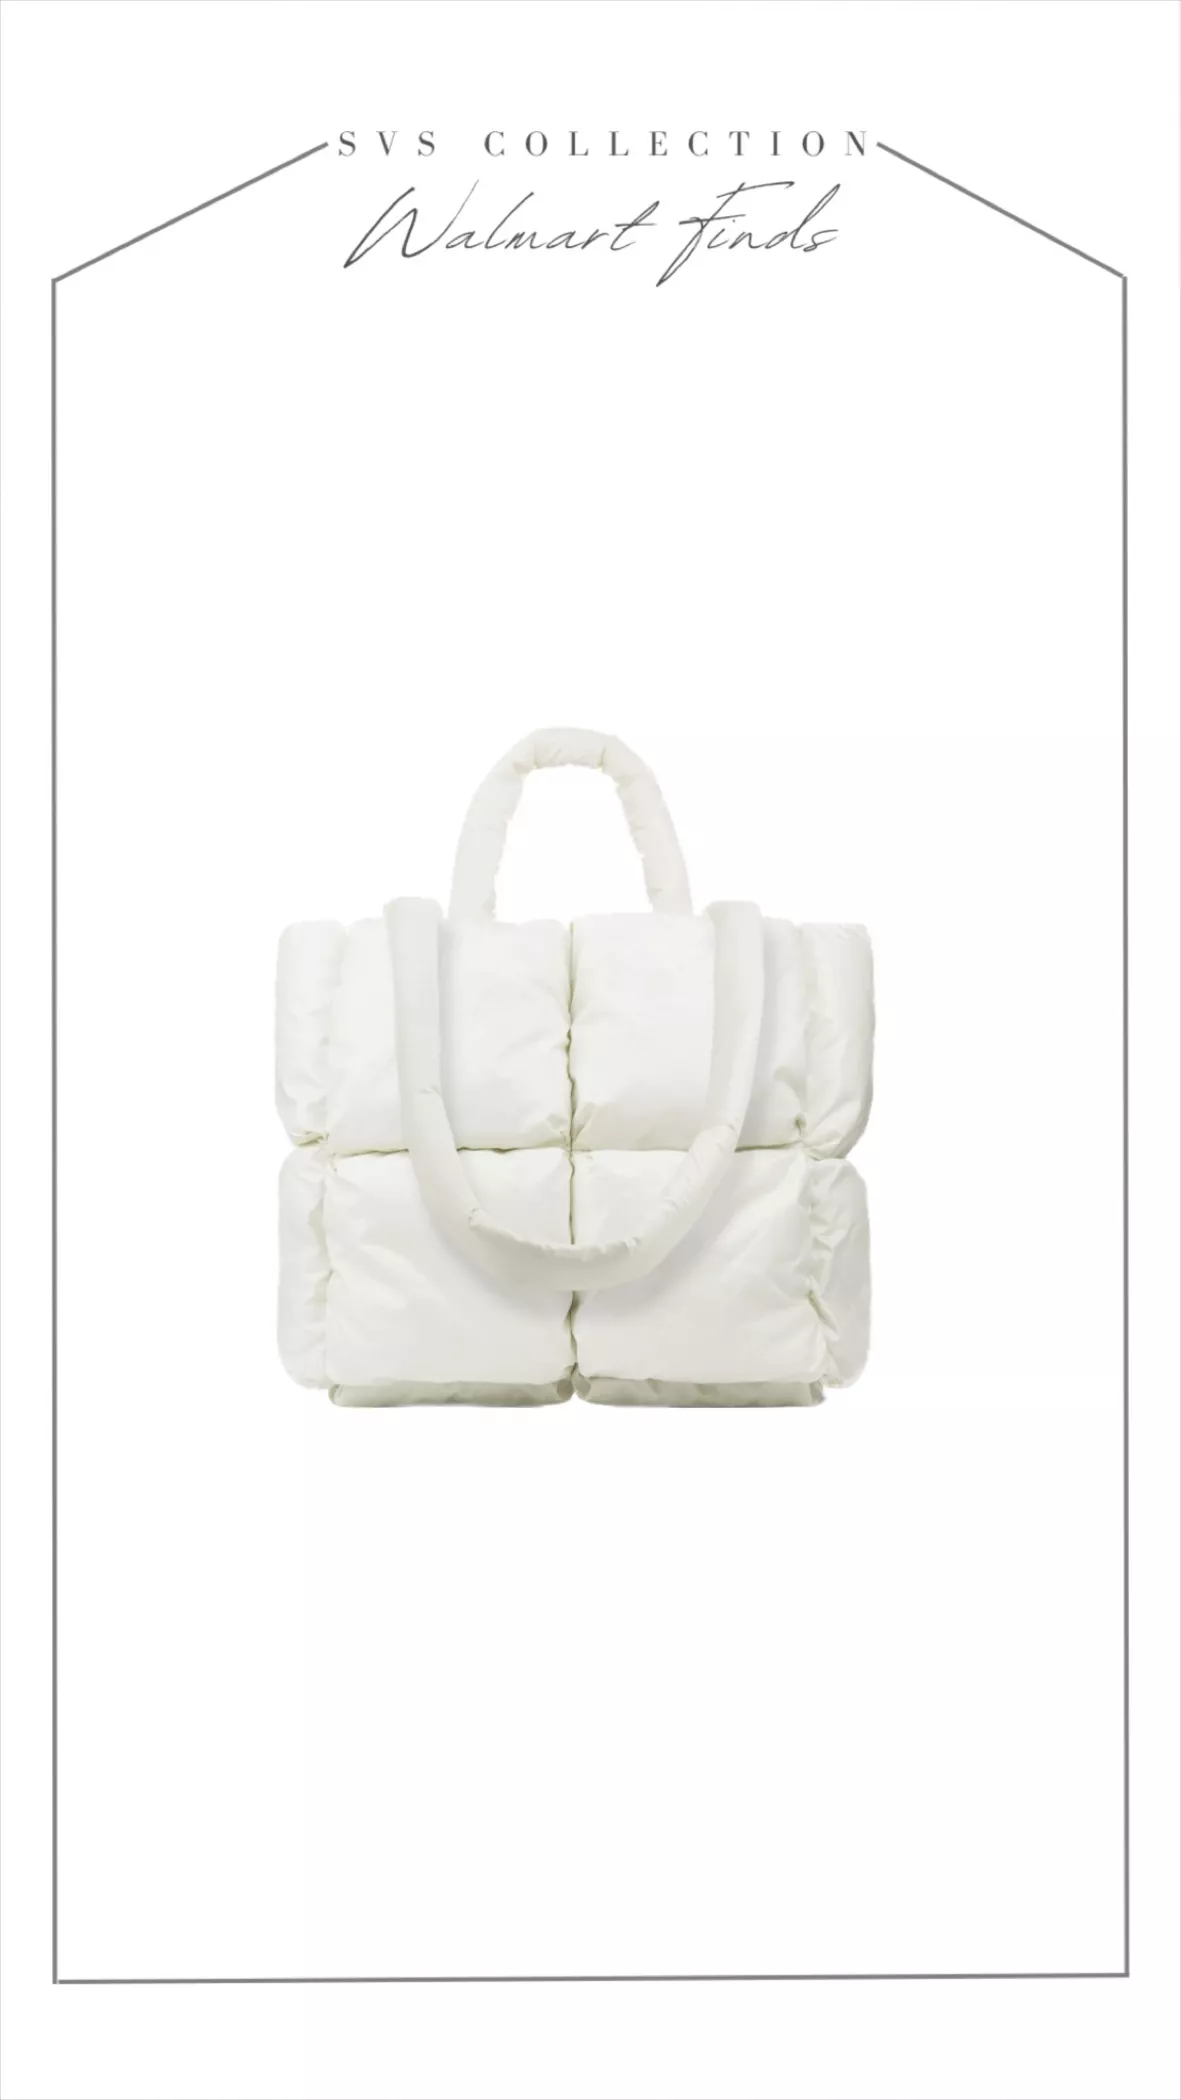 WHITE ECO LEATHER QUILTED HANDBAG SET OF 4 – Le Obsession Boutique